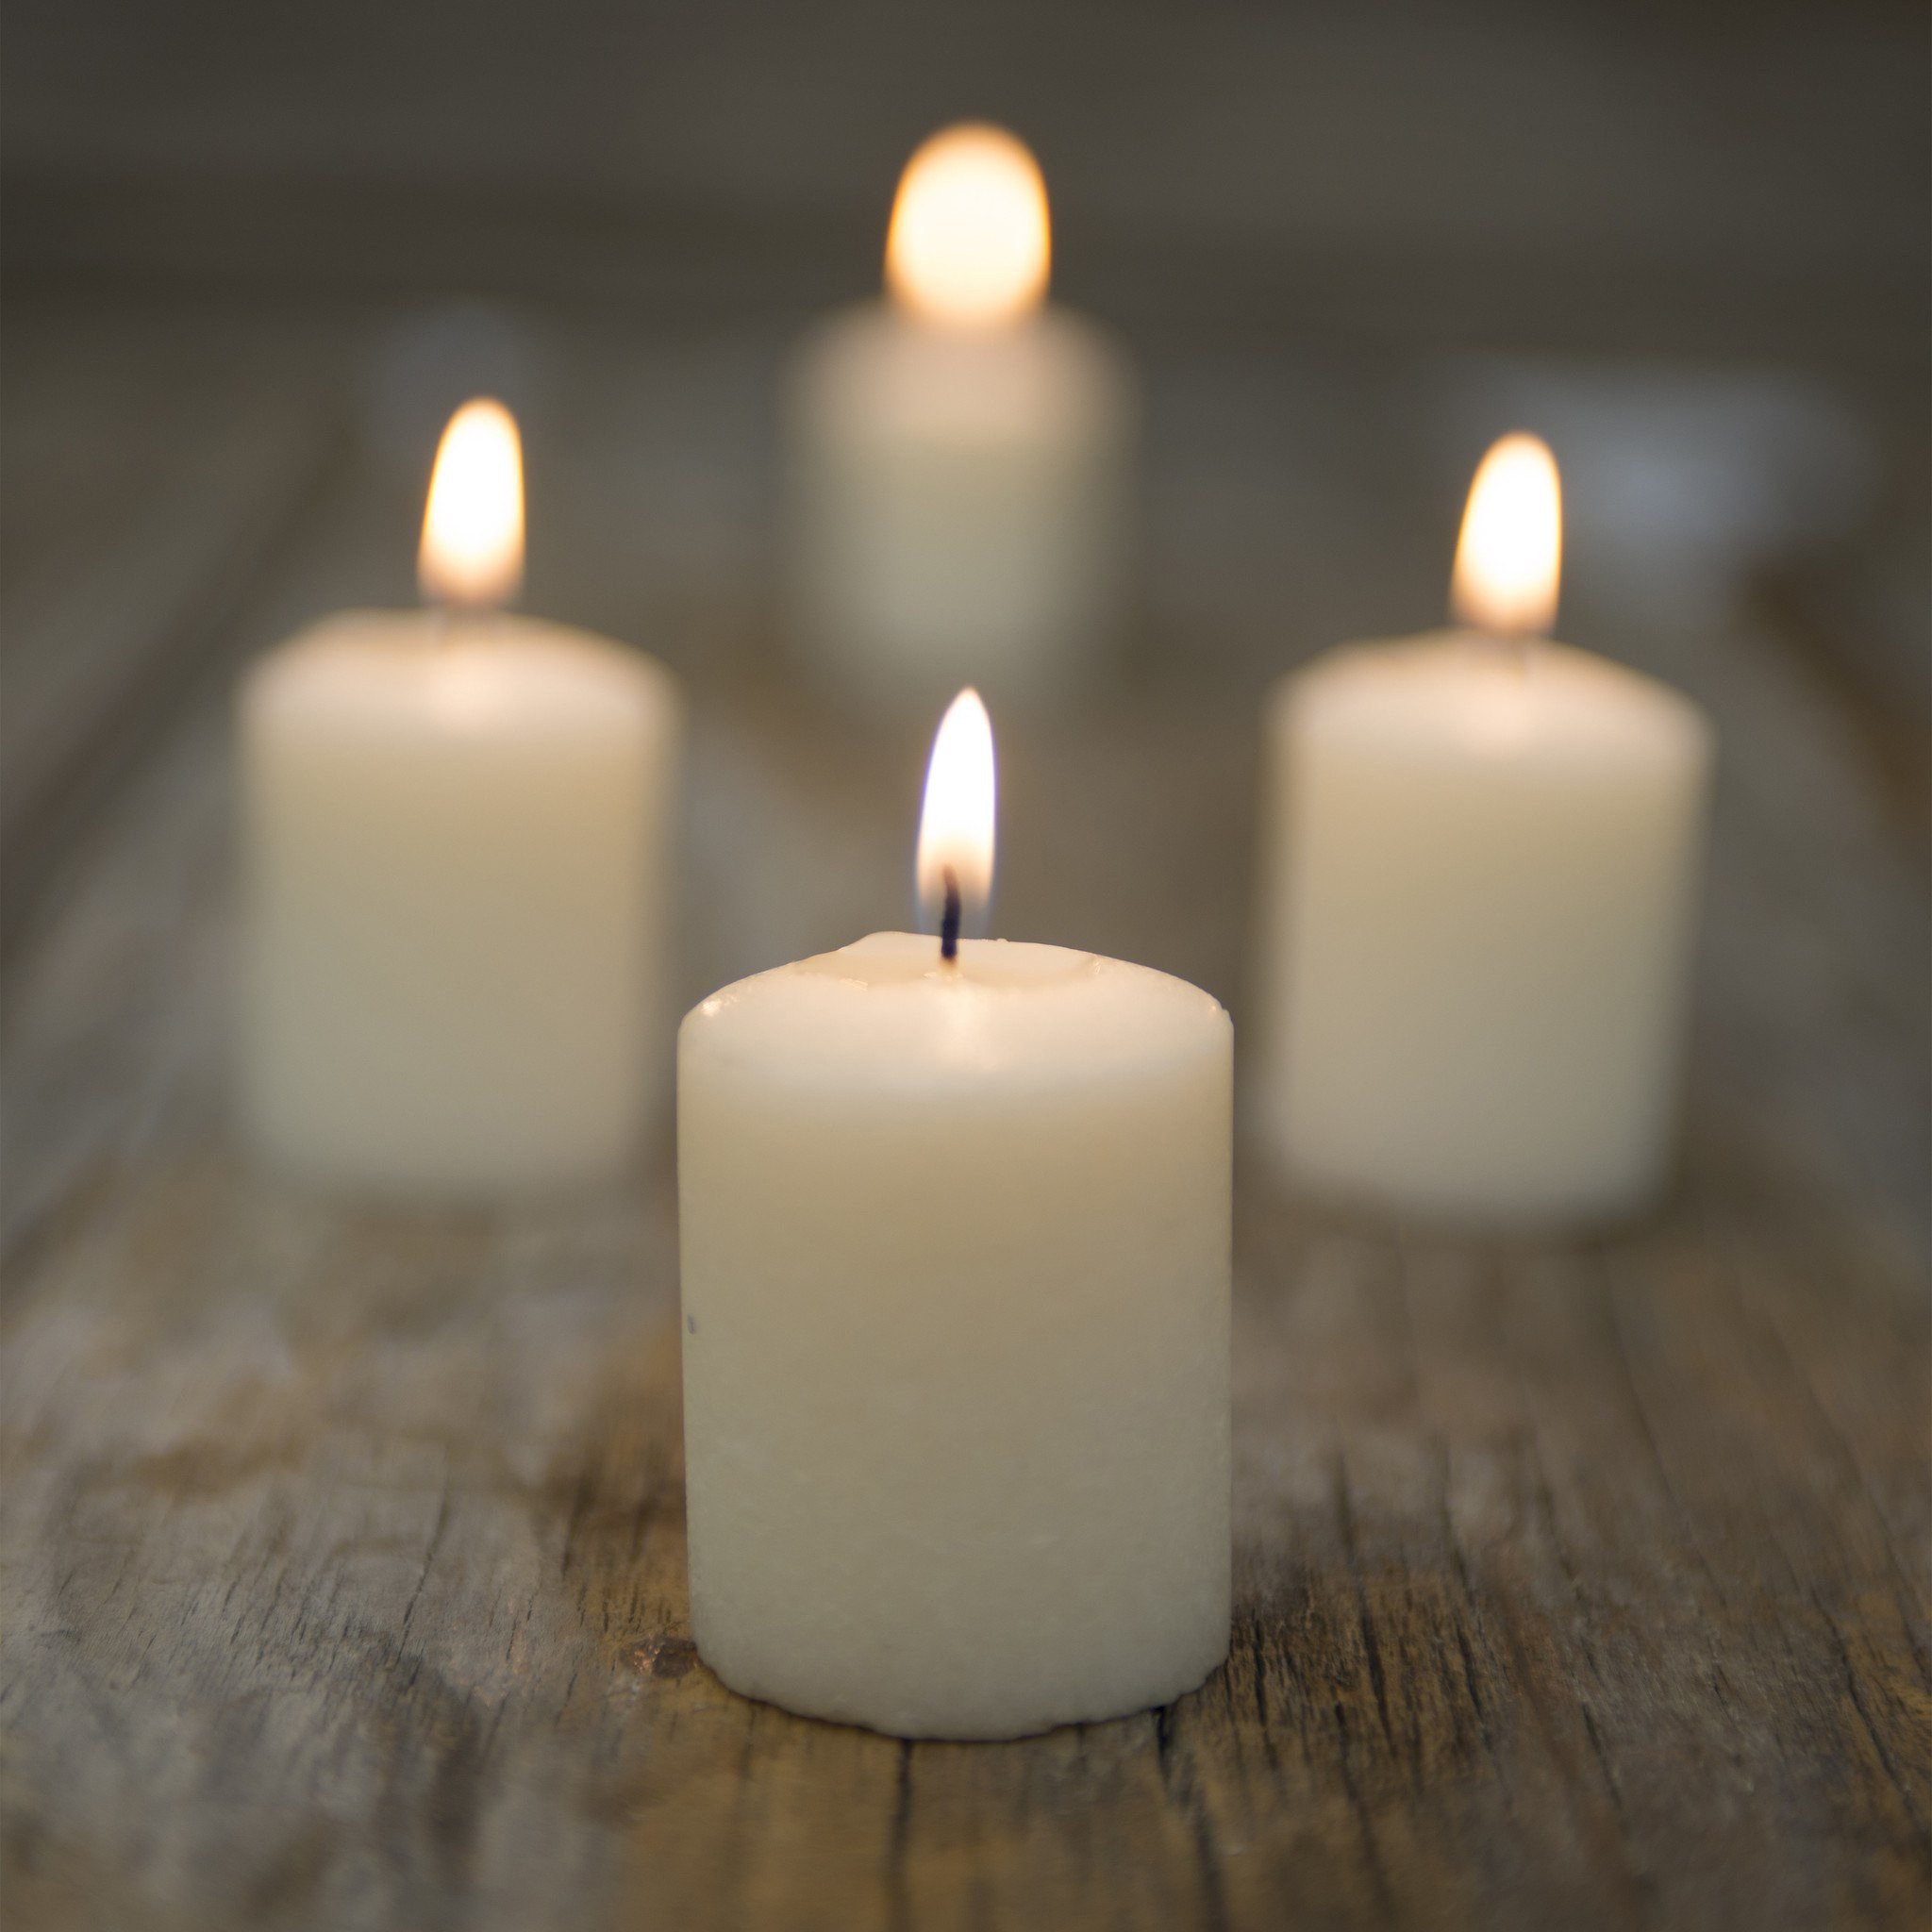 Buy Ivory Votive Candle 5hr at Candlemart.com for only $ 0.50